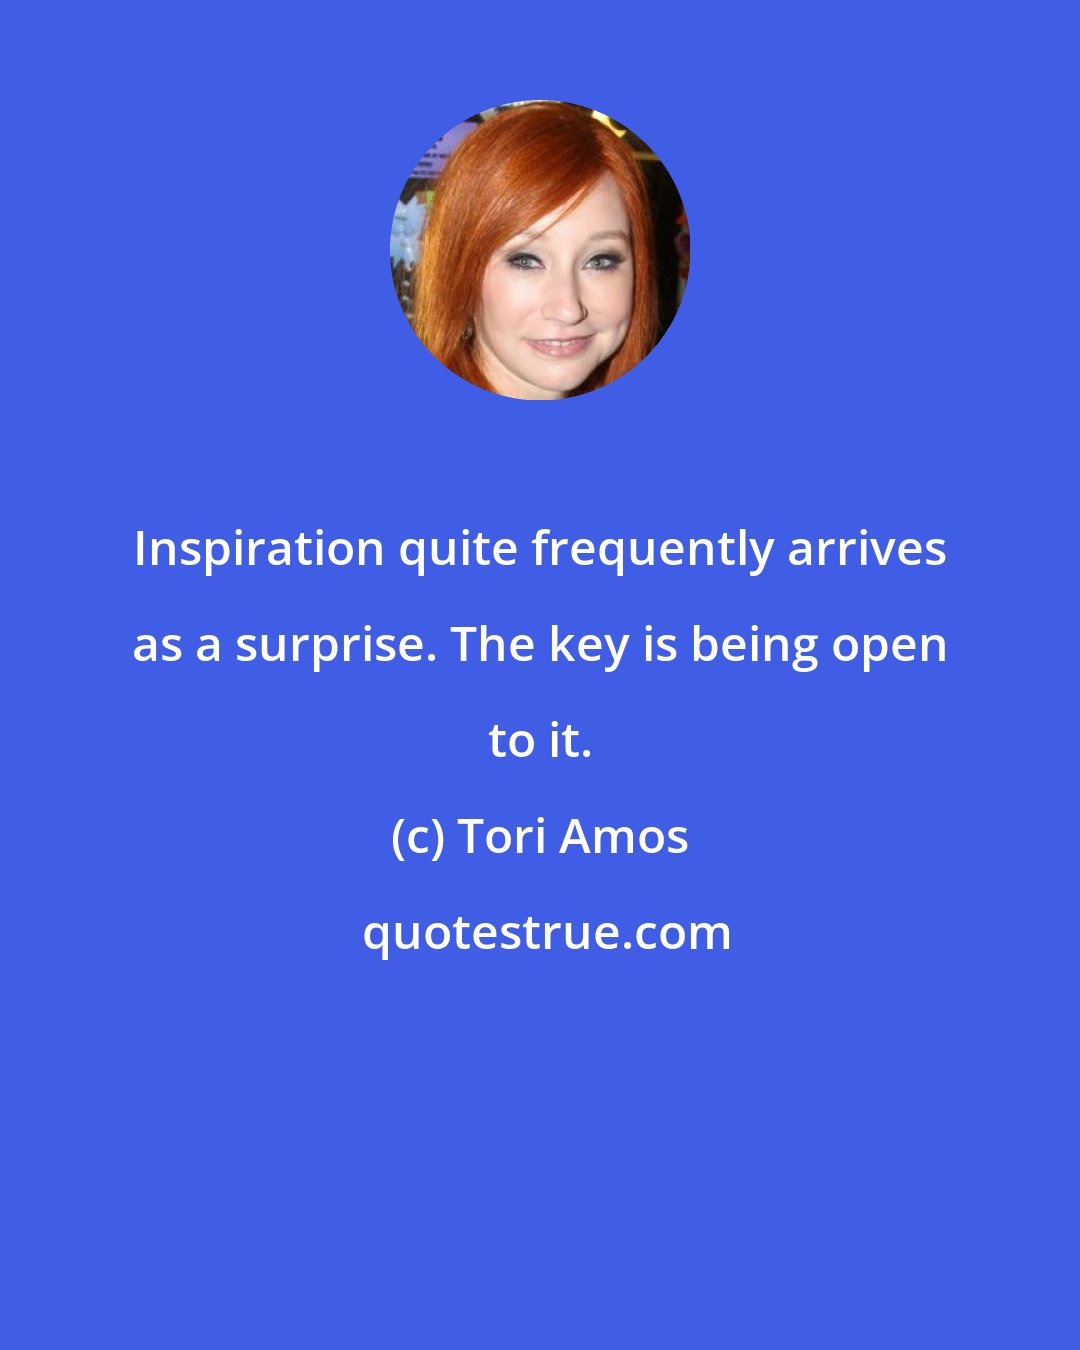 Tori Amos: Inspiration quite frequently arrives as a surprise. The key is being open to it.